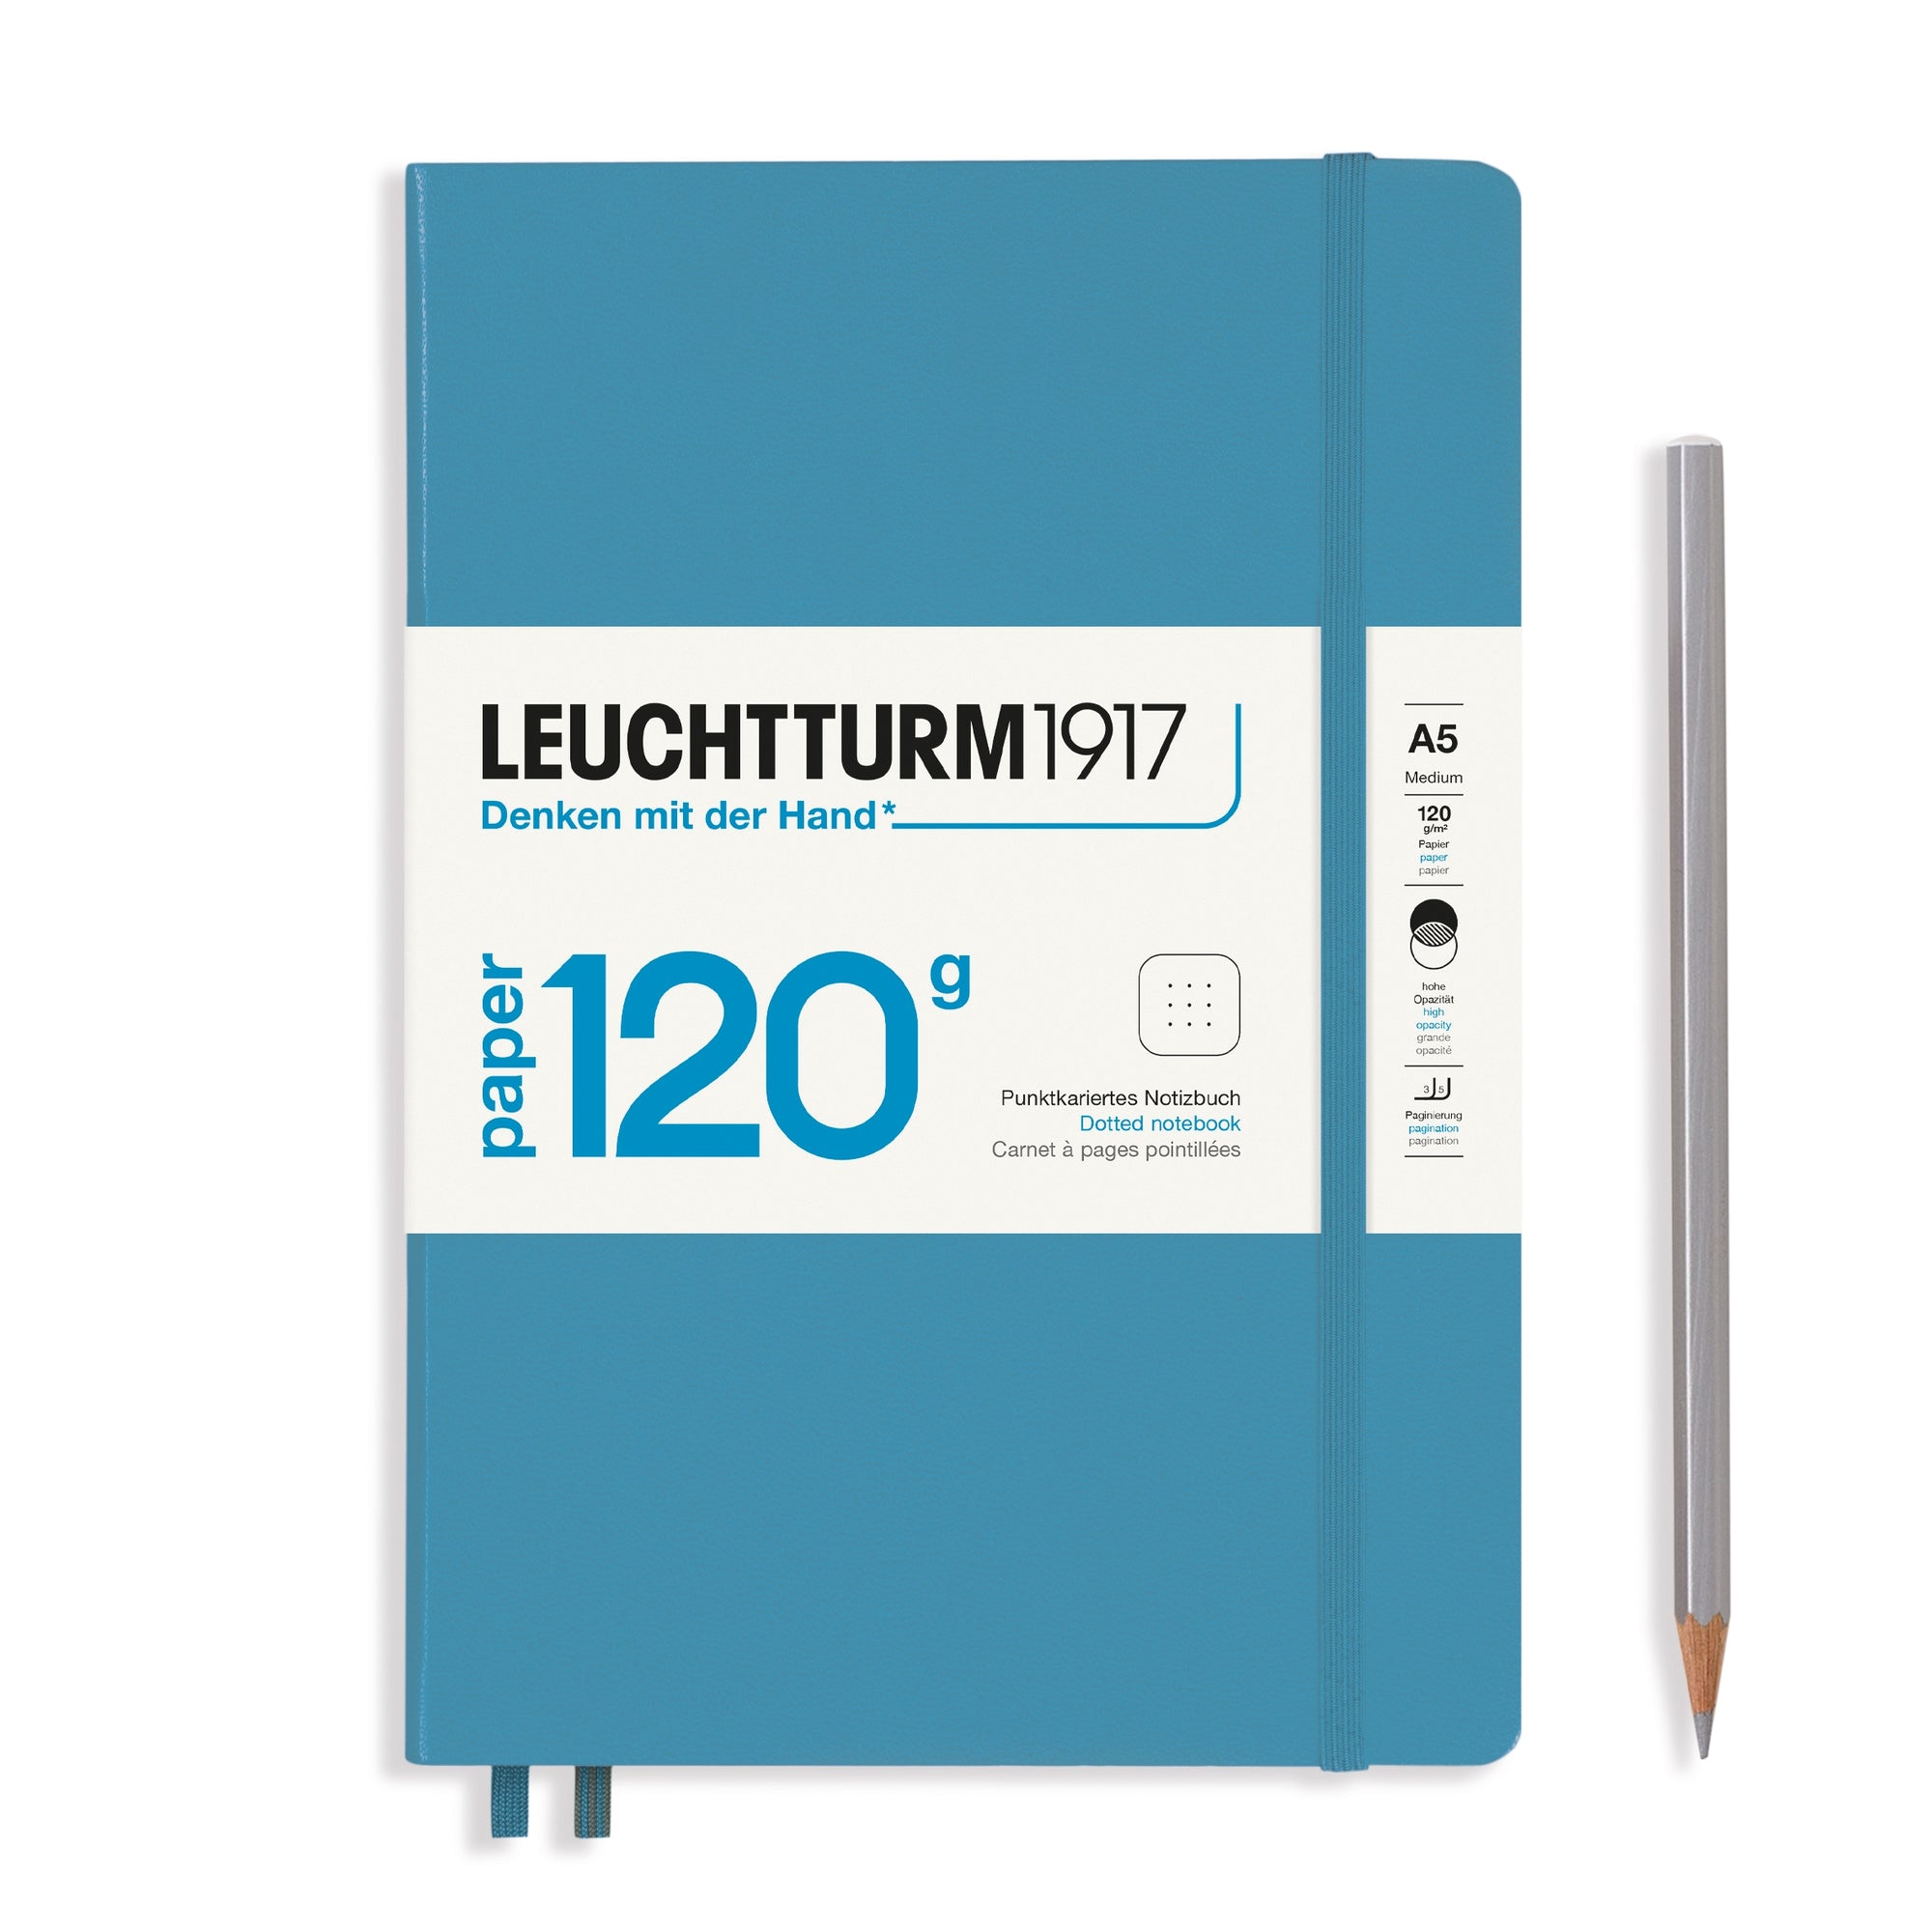 Leuchtturm1917, 120g Notebook Edition, A5, 203 Pages, Nordic Blue